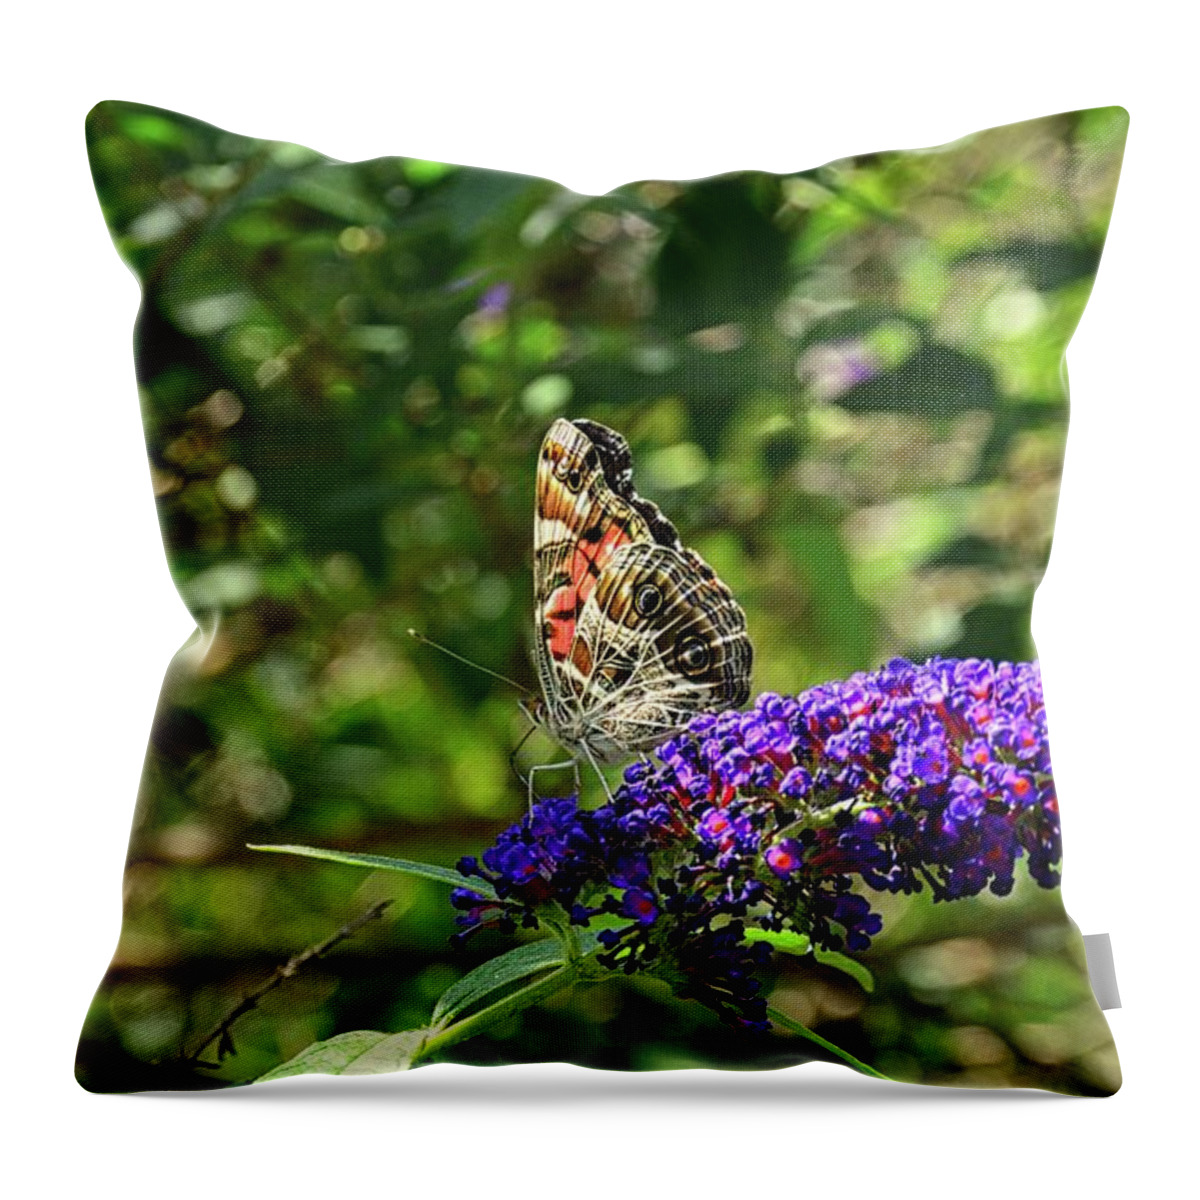 Admiral Butterfly 2 Throw Pillow featuring the photograph Admiral Butterfly 2 by Lisa Wooten